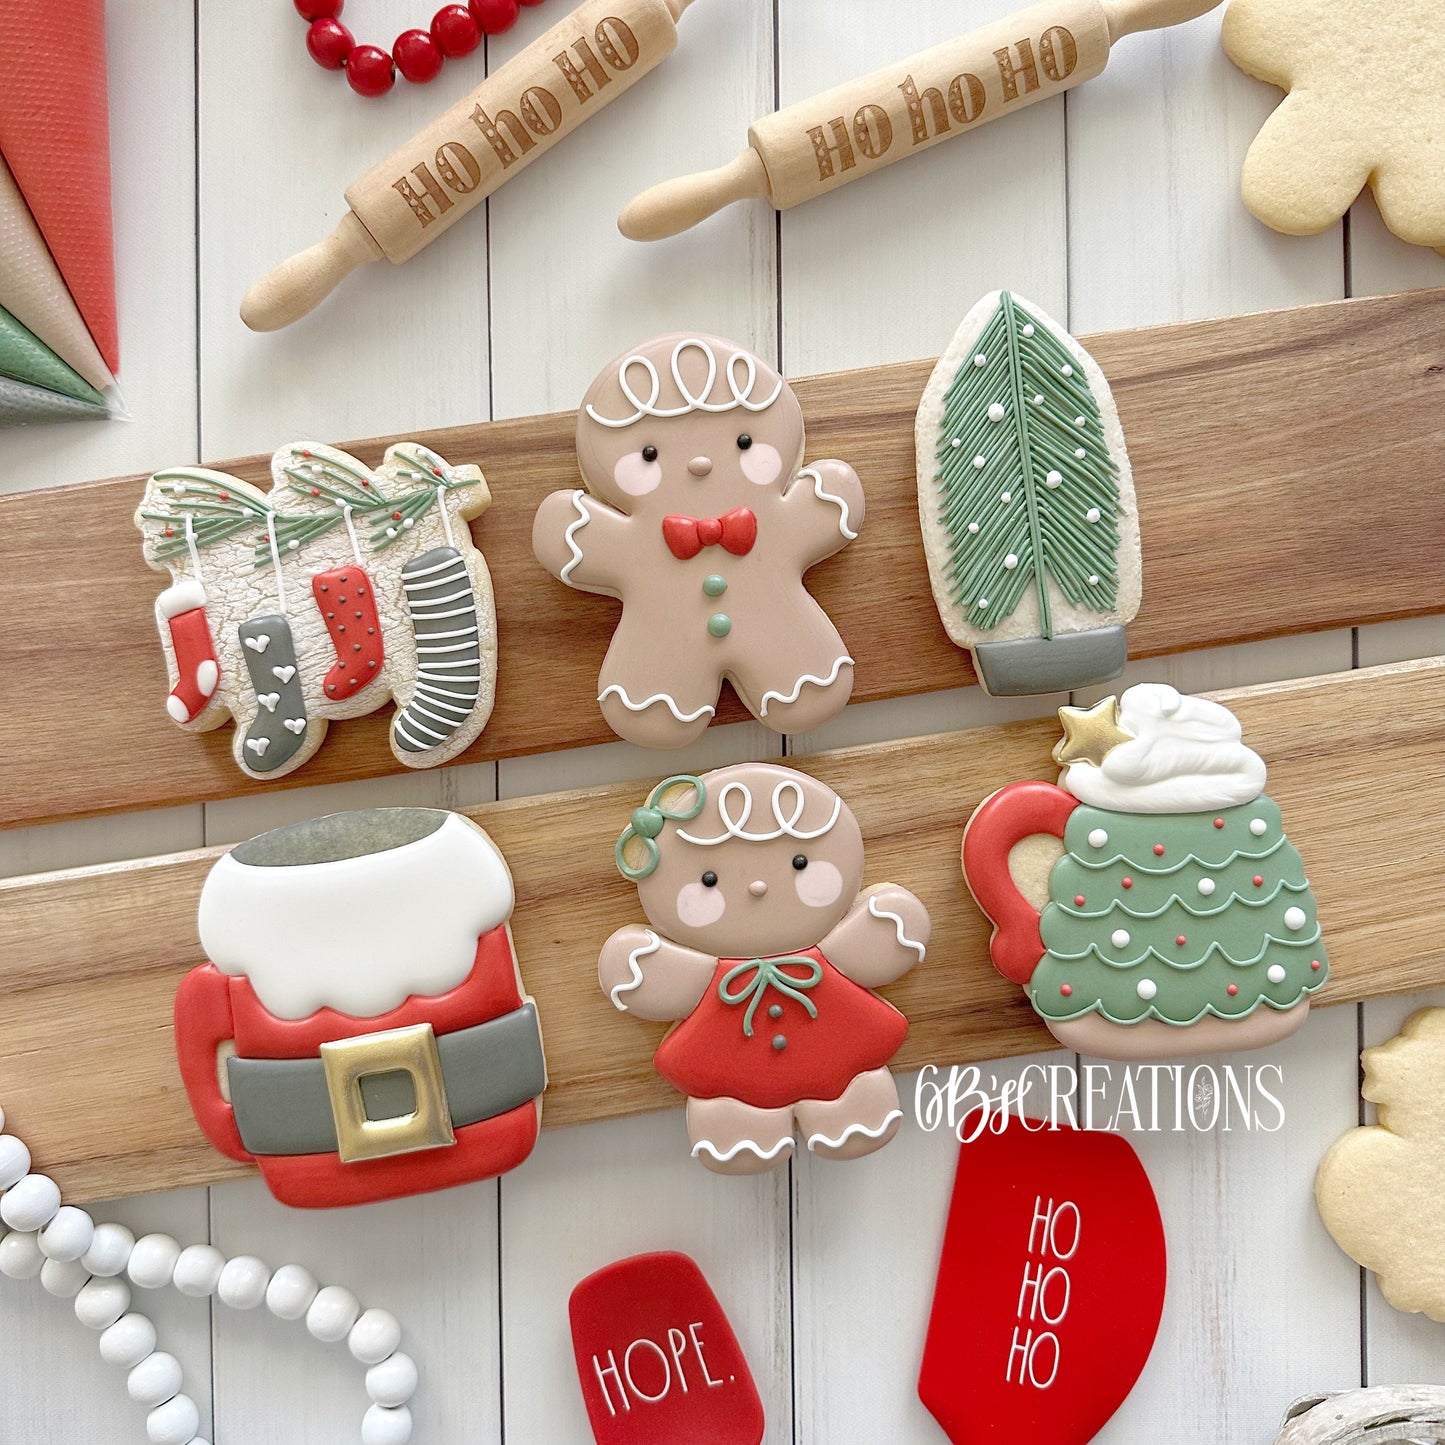 6 B's Creations (Teaching Partners) Christmas in July Set of 6 Cookie Cutters